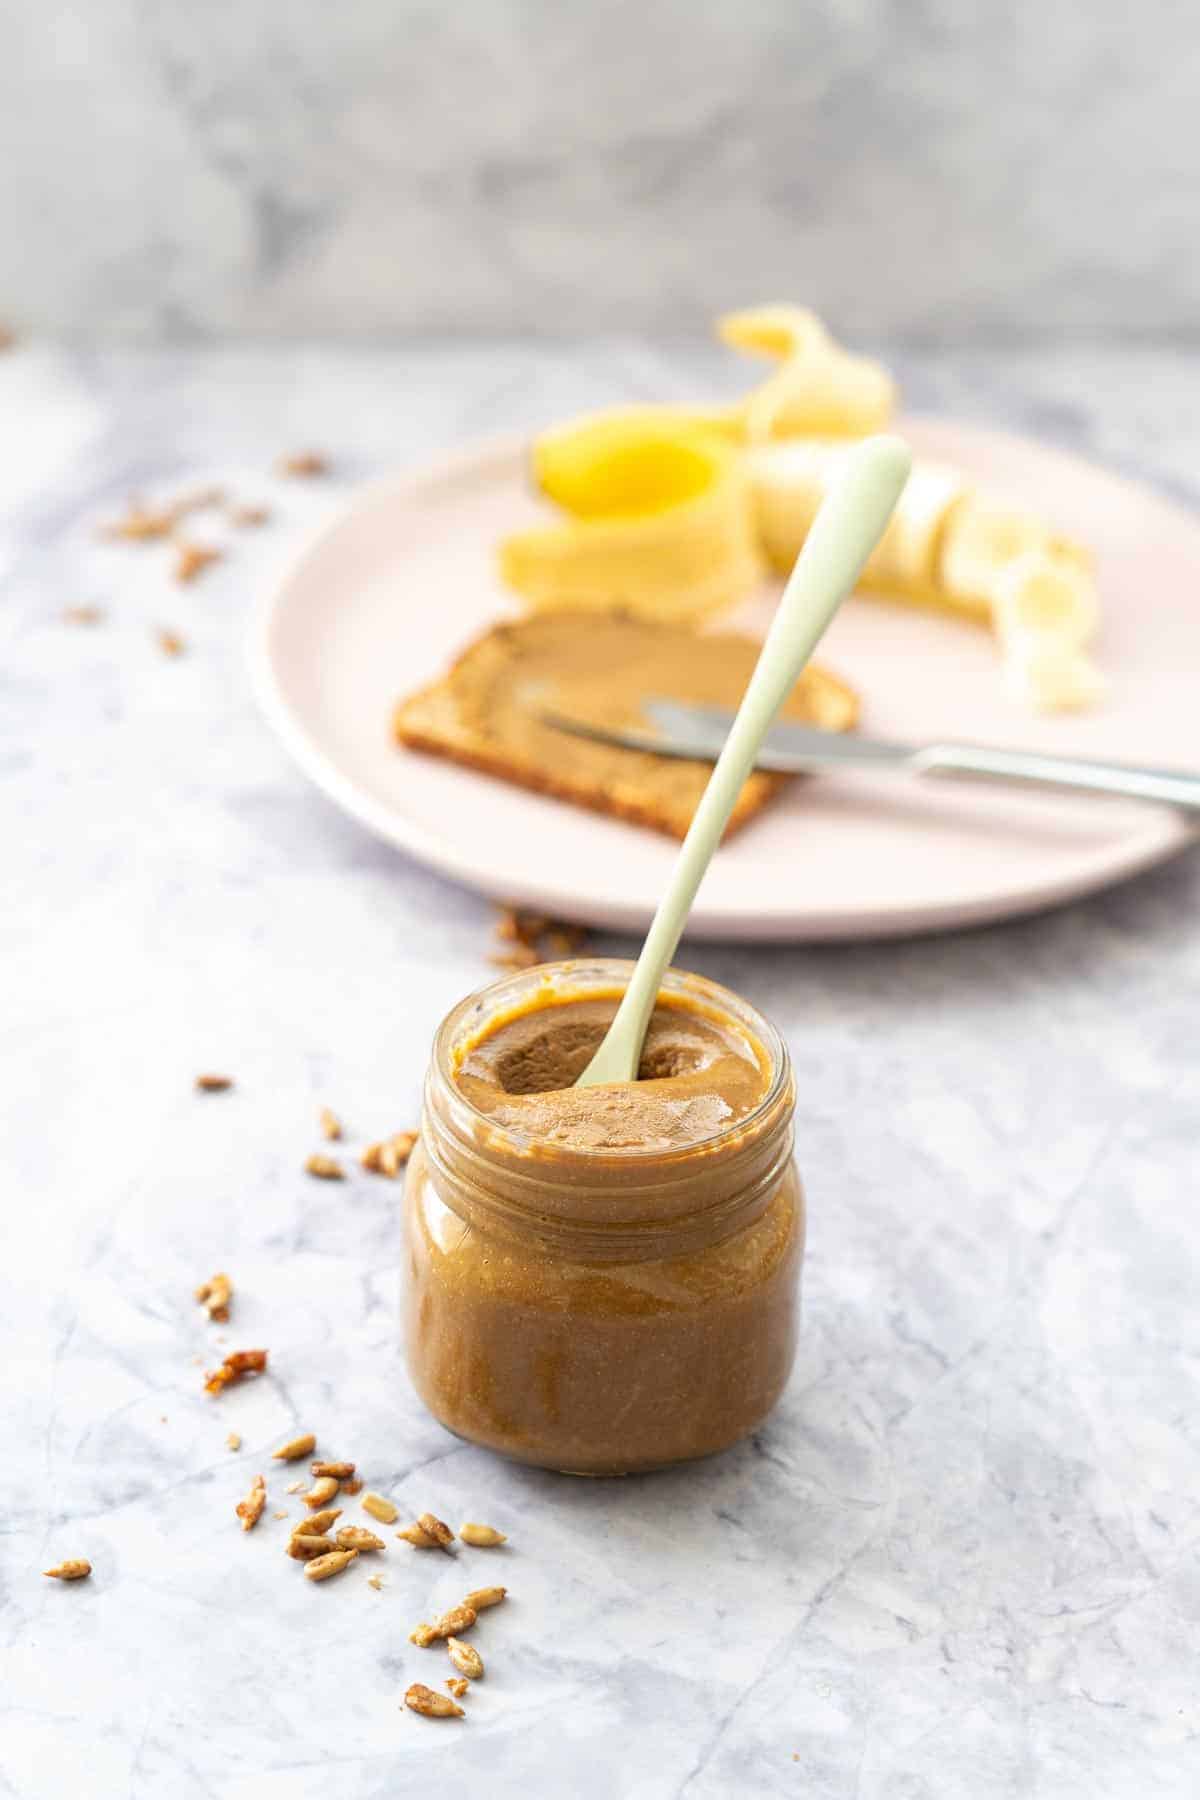 Jar of spread with a spoon in it.